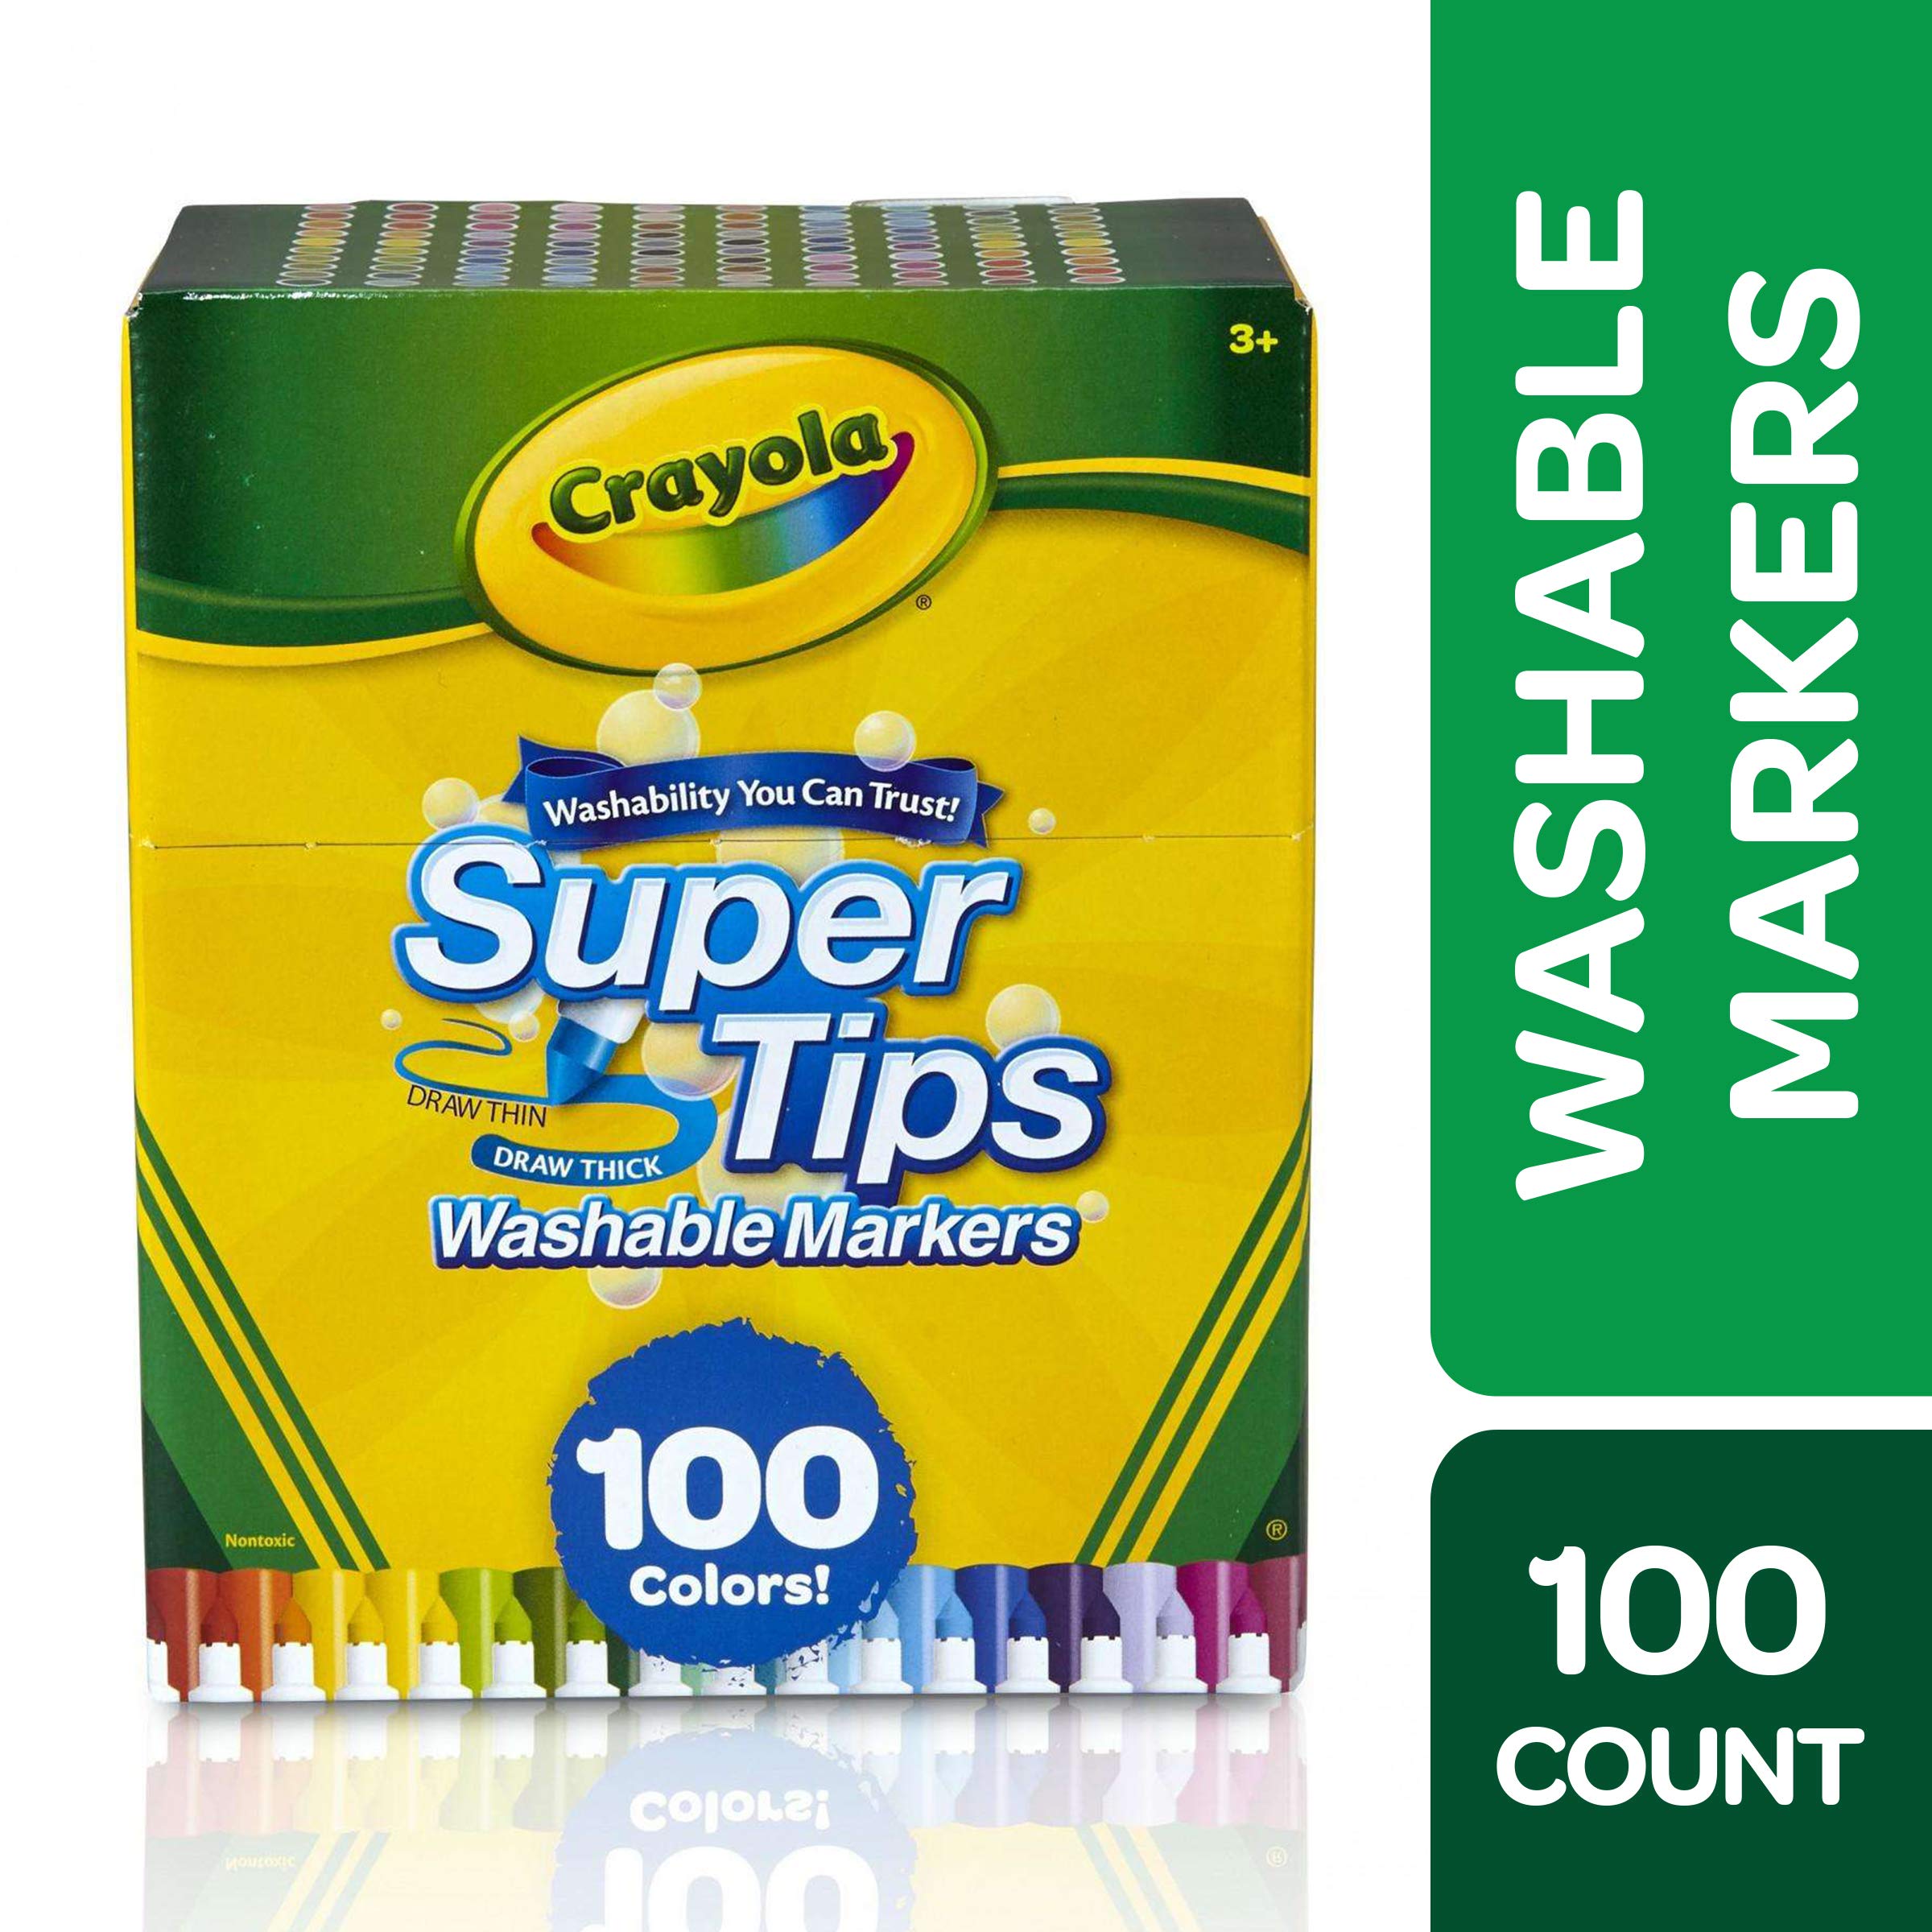 Crayola Super Tips Marker Set (100ct), Fine Point Washable Markers, Drawing Markers for Kids & Adults, Great for Thick & Thin Lines